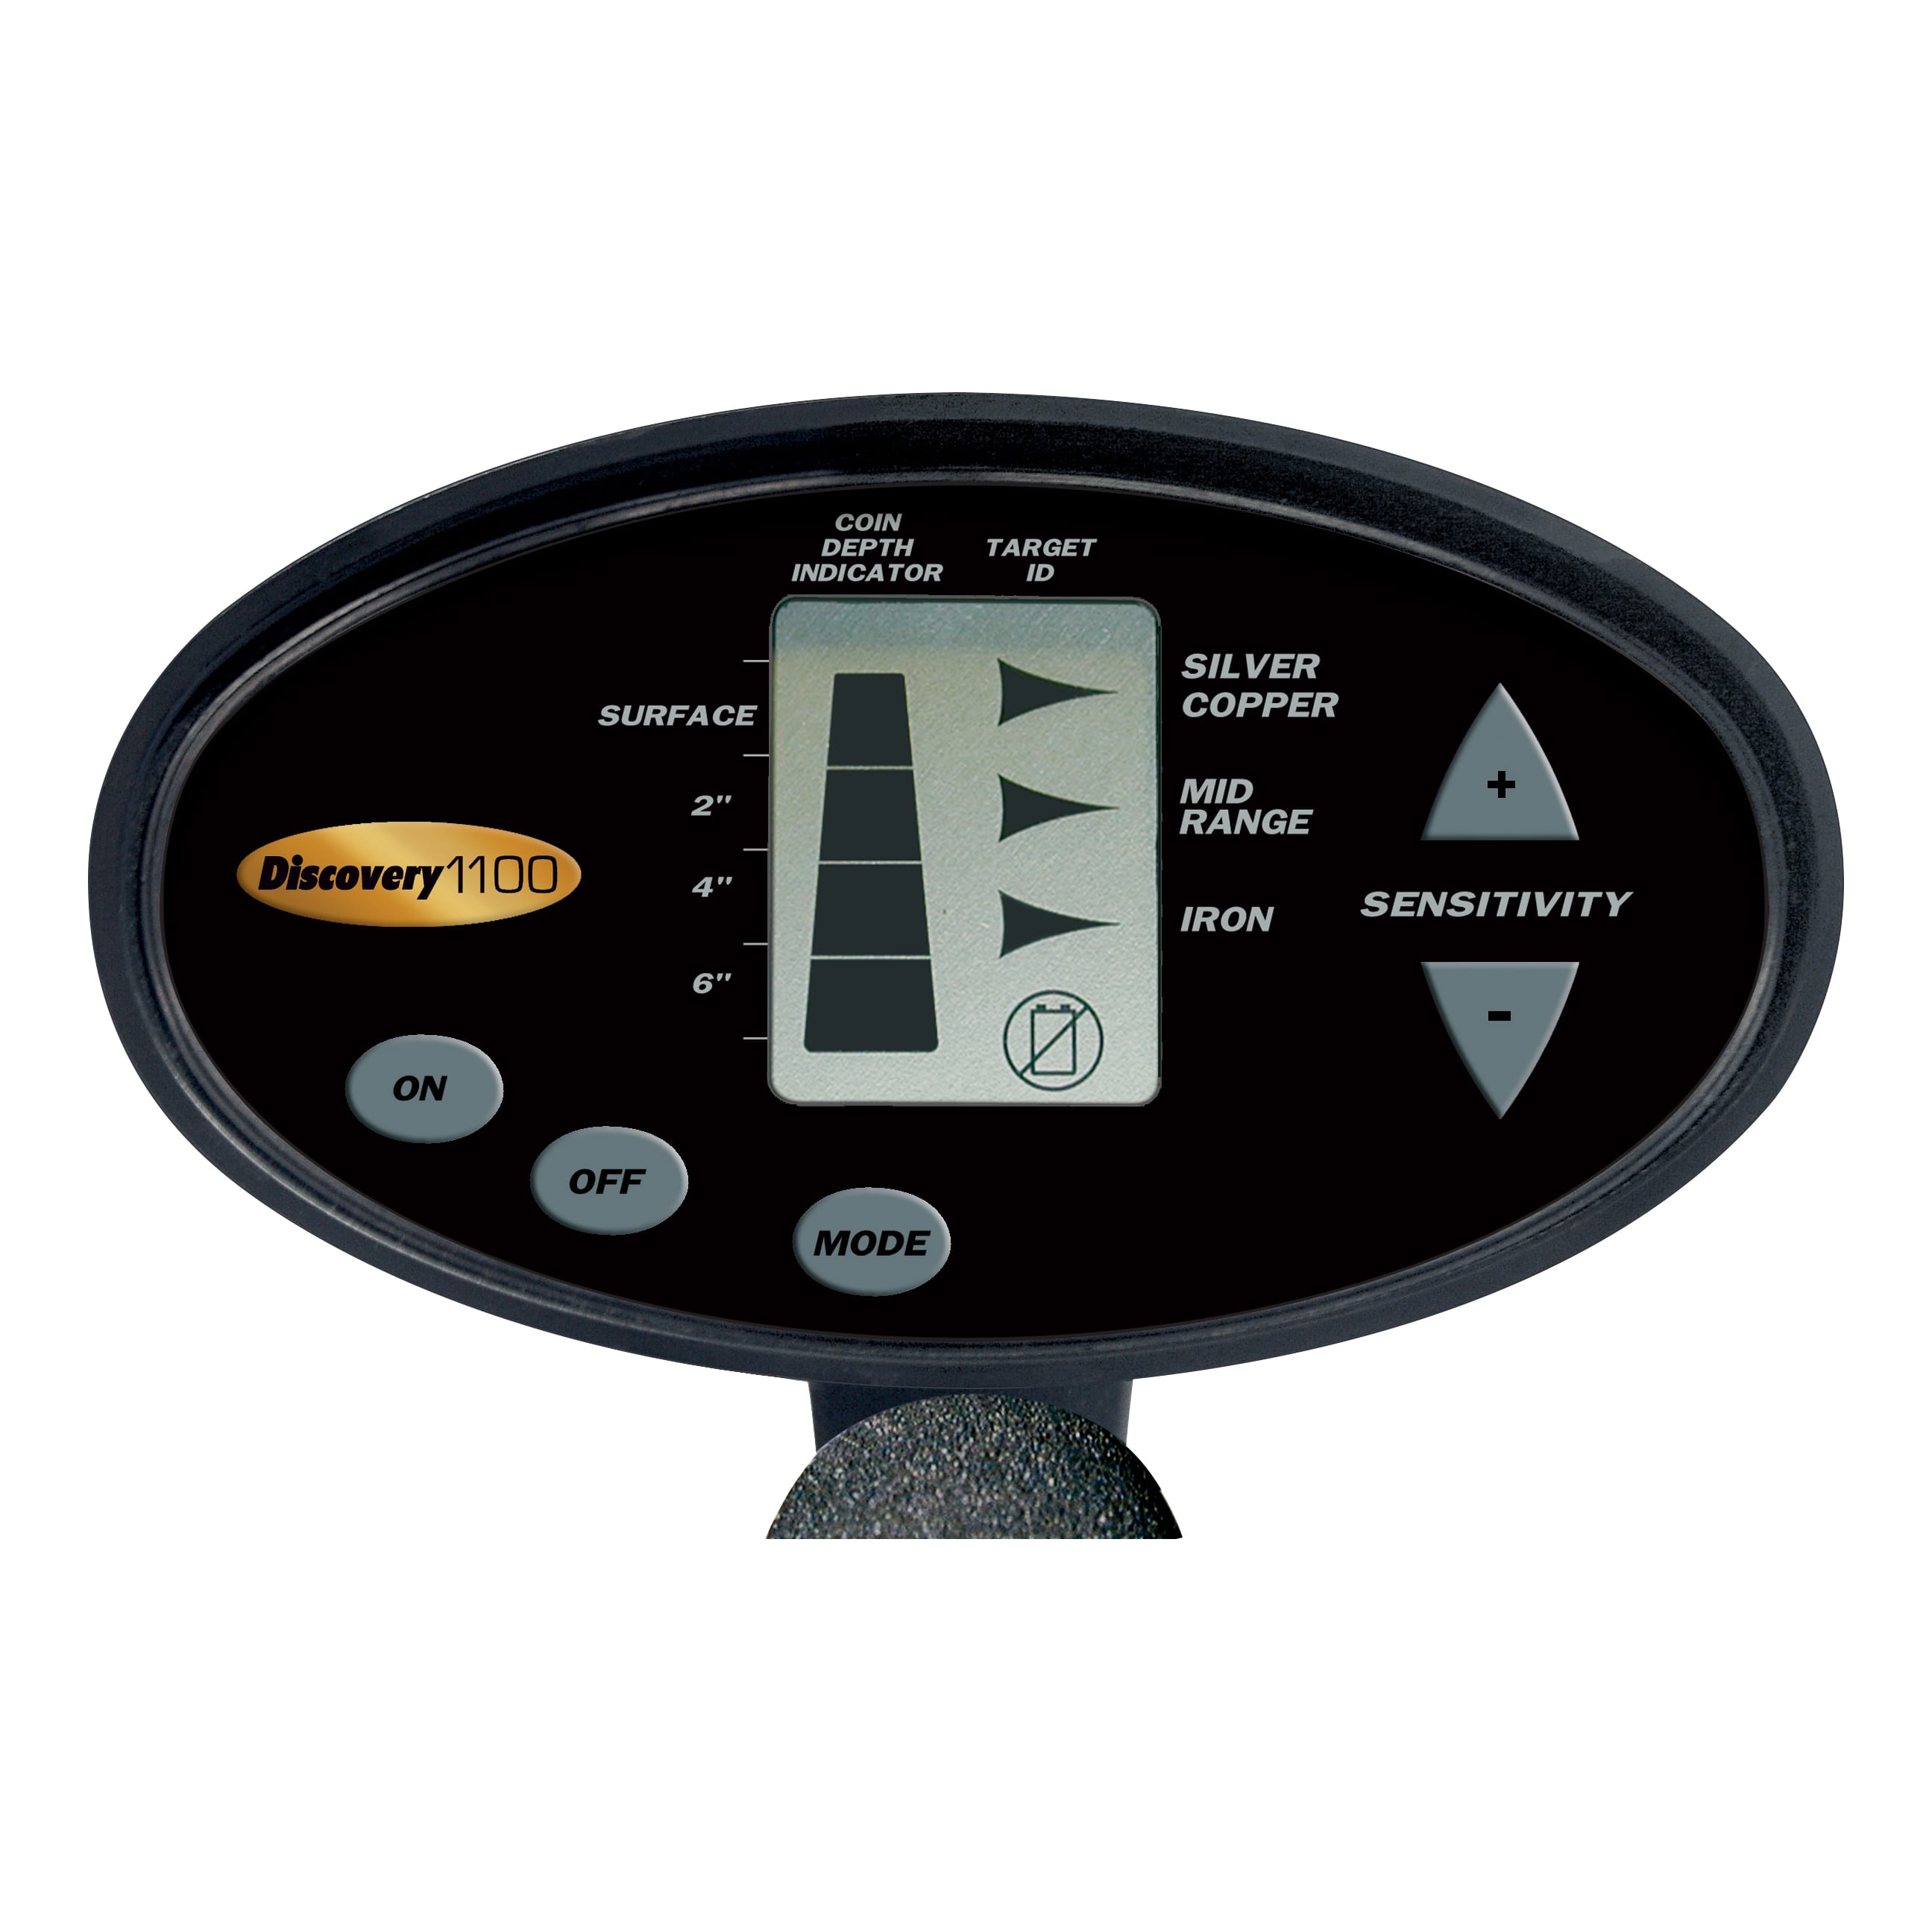 Bounty Hunter® Discovery 1100 Metal Detector - Faceplate View